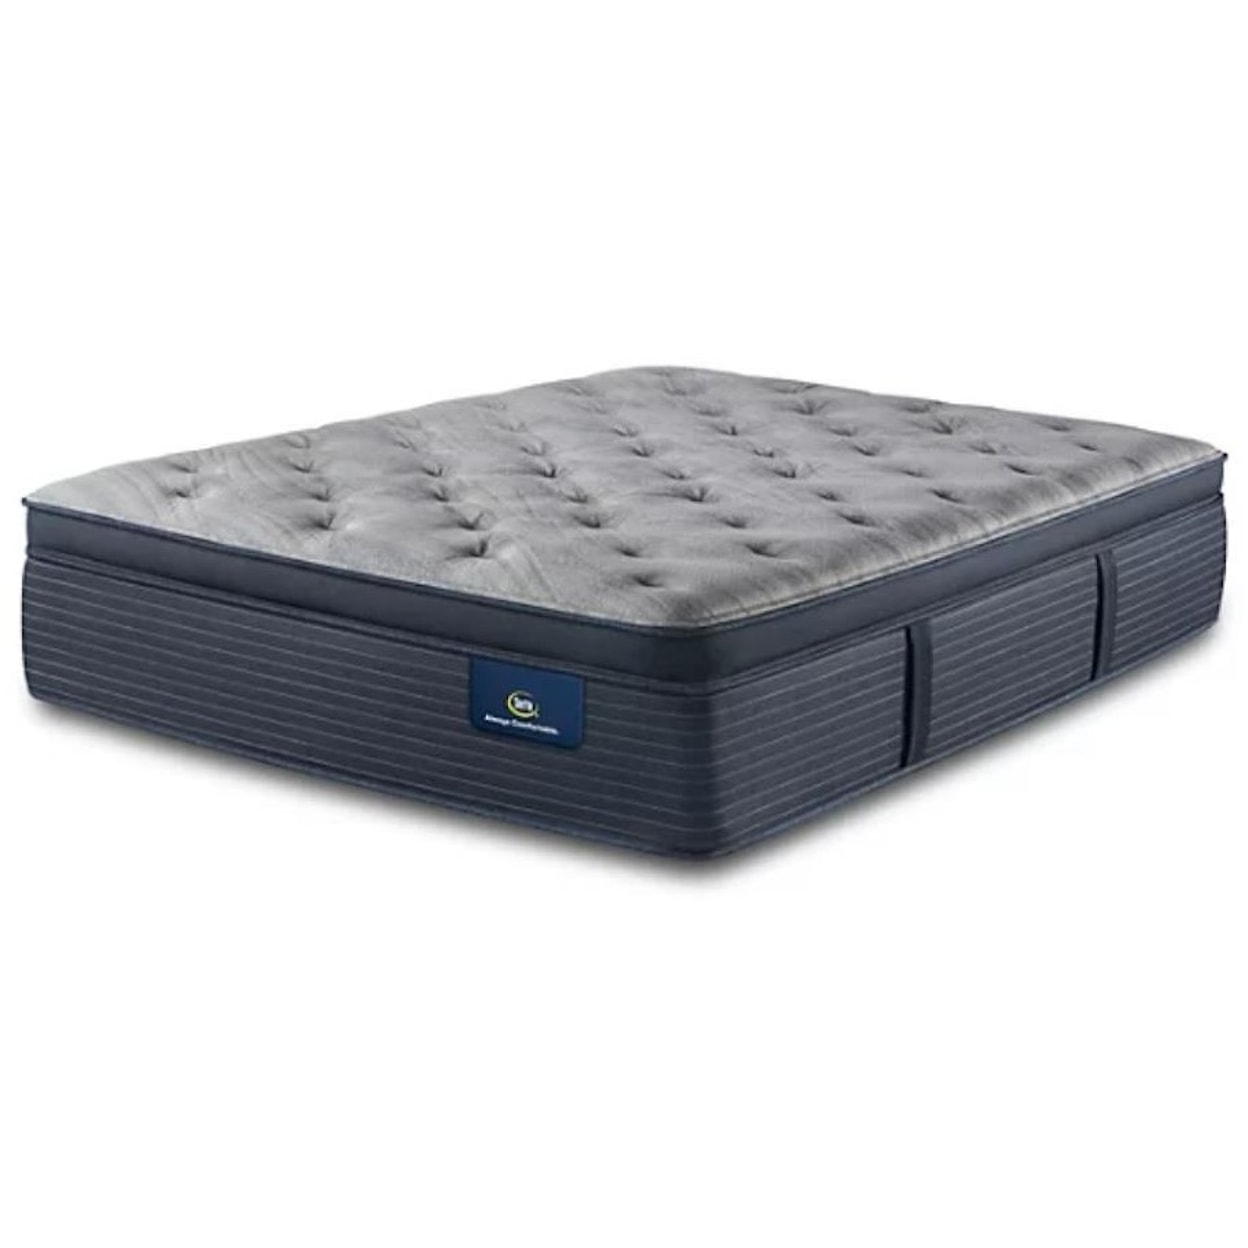 Serta Soothing Rest Soothing Rest Plush PT Queen Mattress